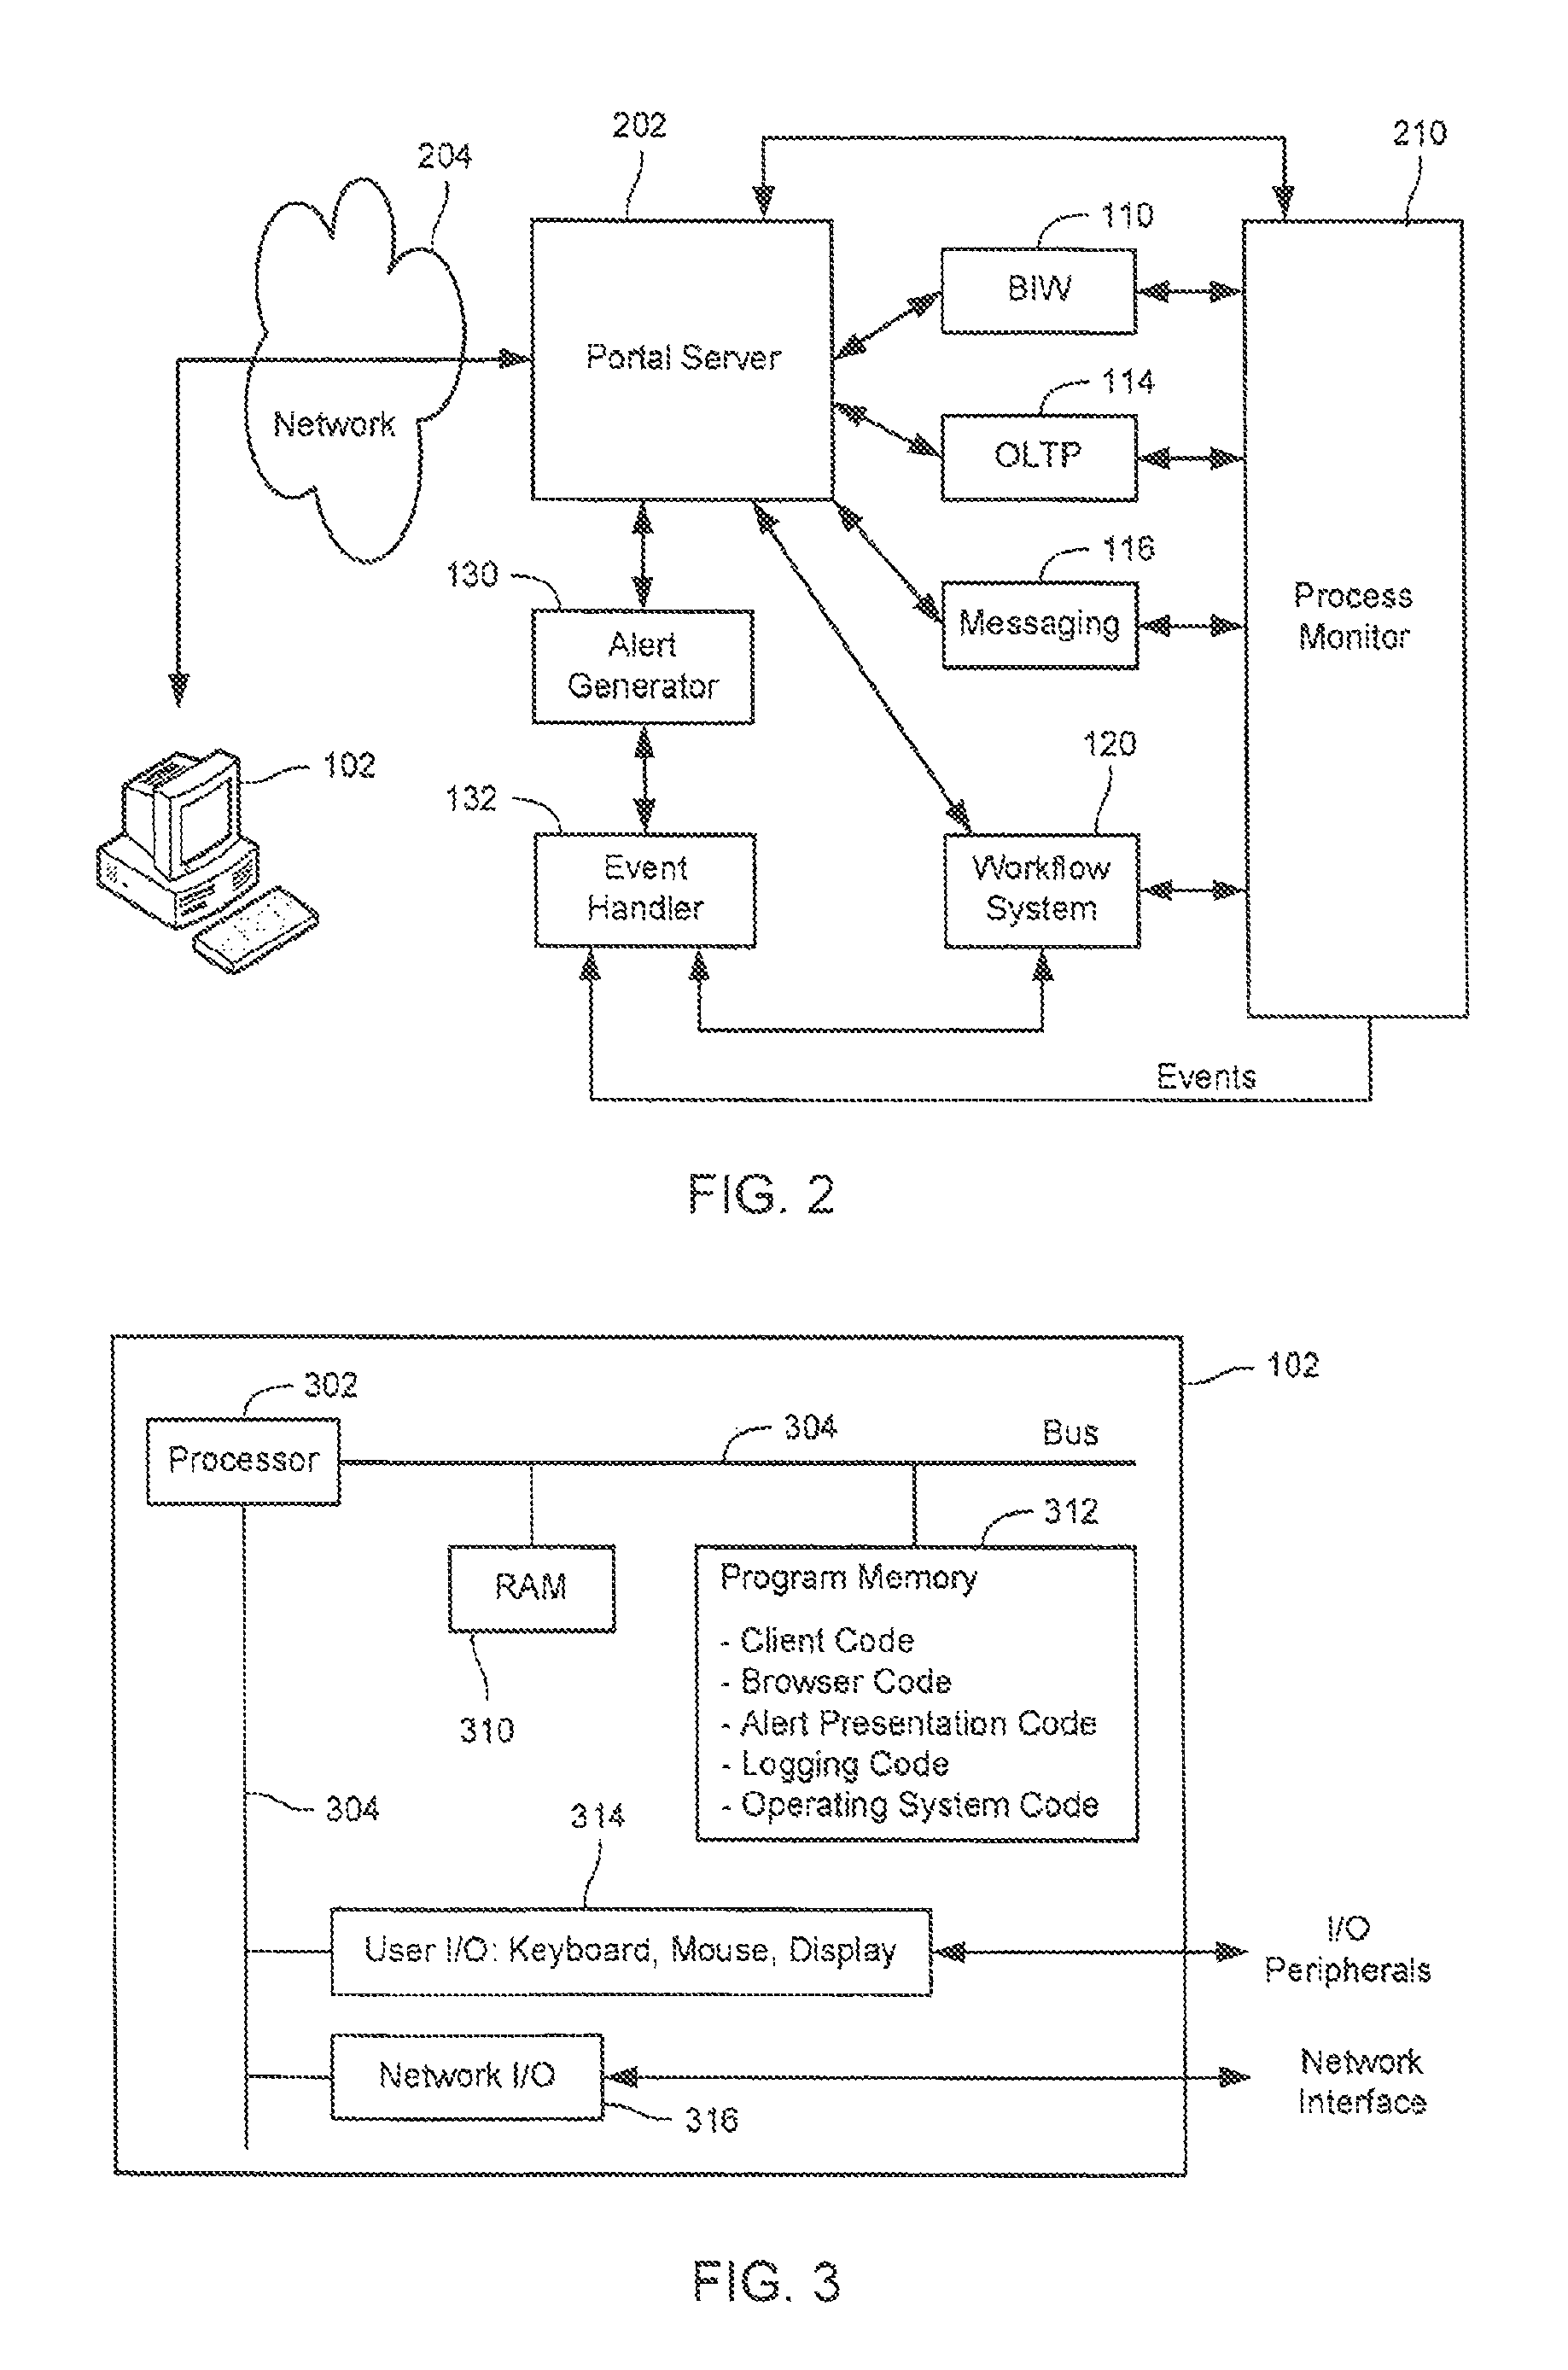 System supported optimization of event resolution